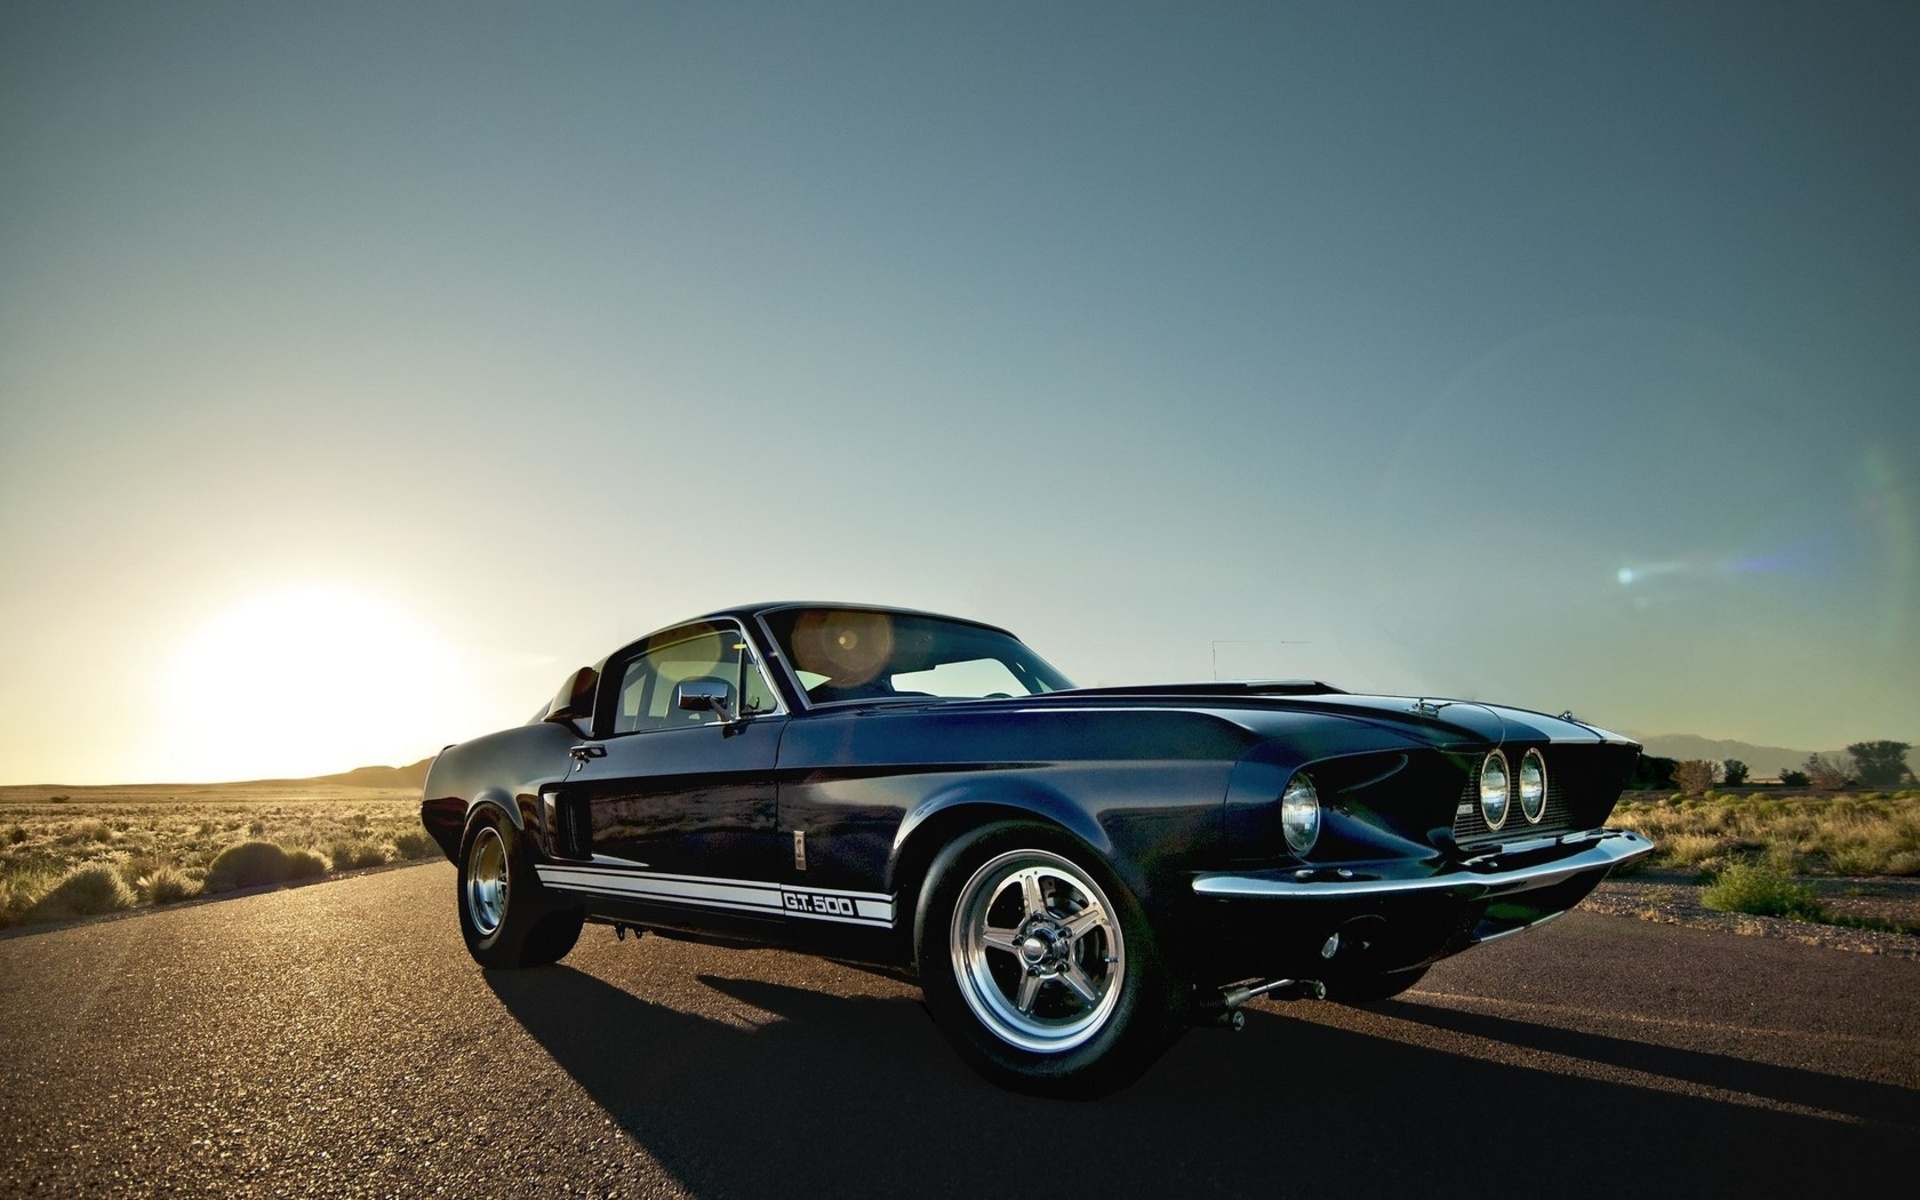 vehicles, Cars, Fords, Mustamgs, Hot rods, Muscle cars, Classic cars Wallpaper